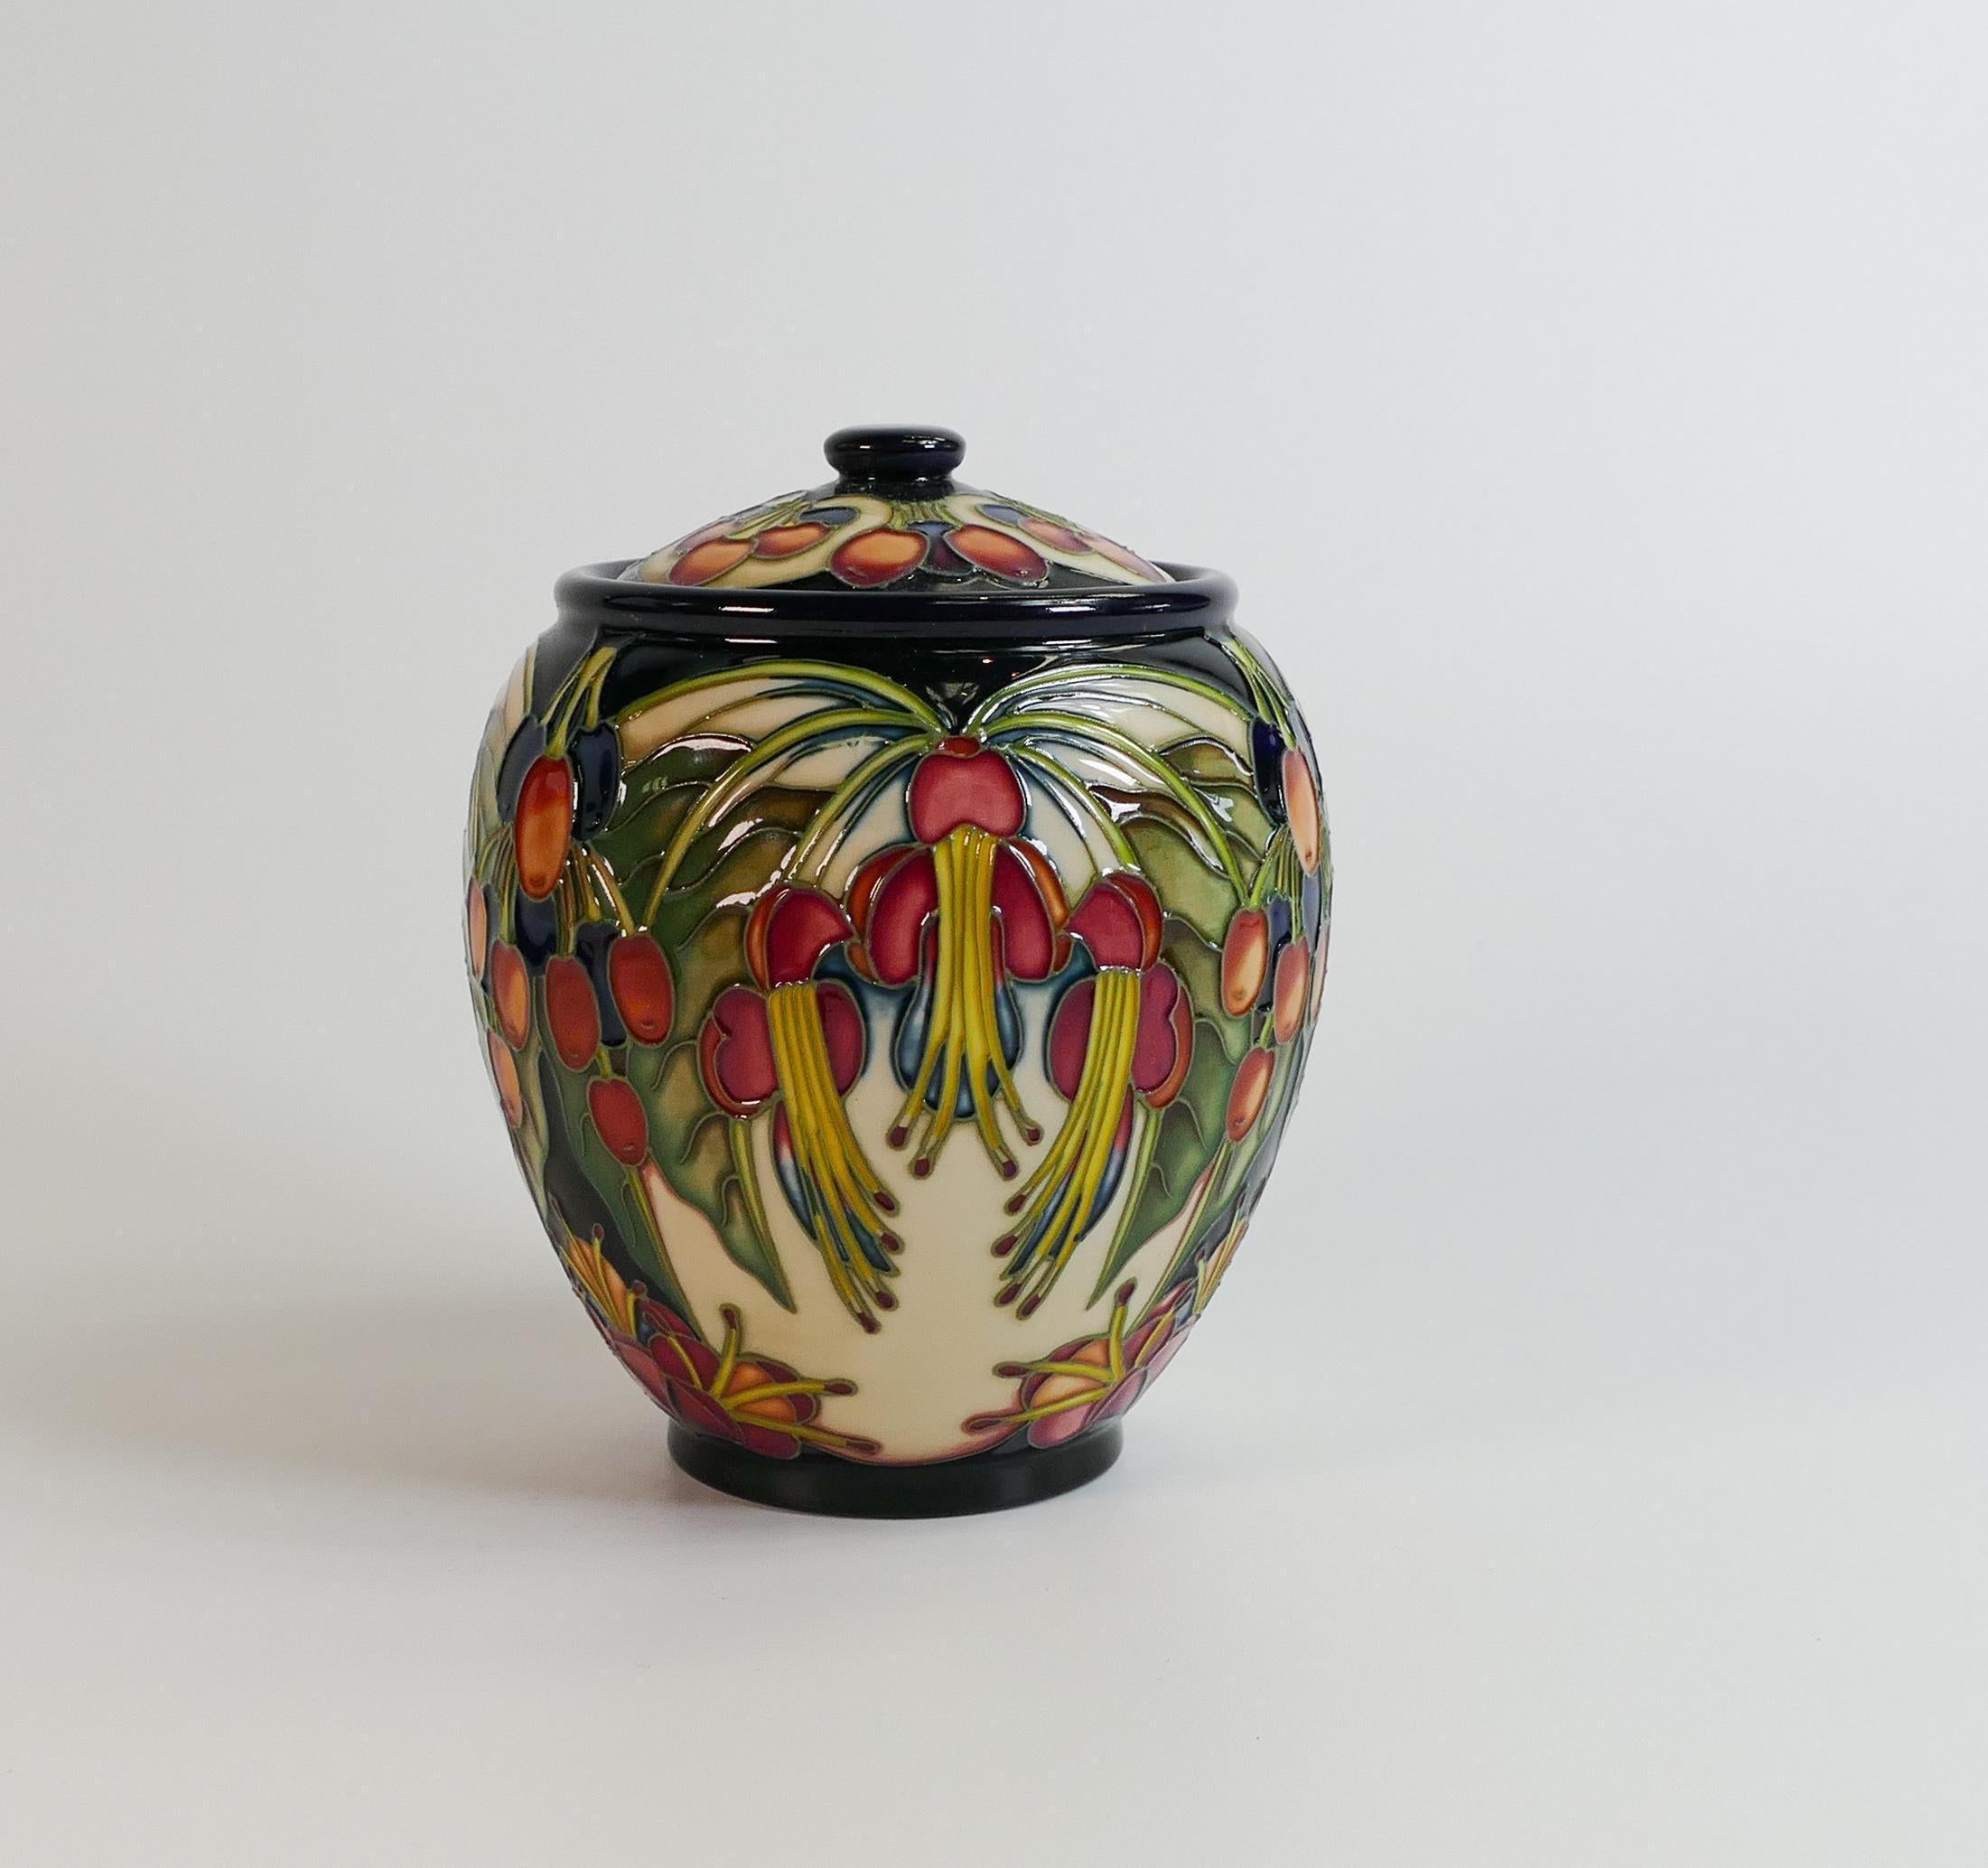 MOORCROFT Art Pottery PURIRI Baummuster von Philip Gibson Designer-Deckeltopf. Datiert 2004. BOXED.

A Moorcroft pottery biscuit barrel and cover in the Puriri Tree pattern, of shouldered baluster form, designed by Philip Gibson, verso eingeprägtes